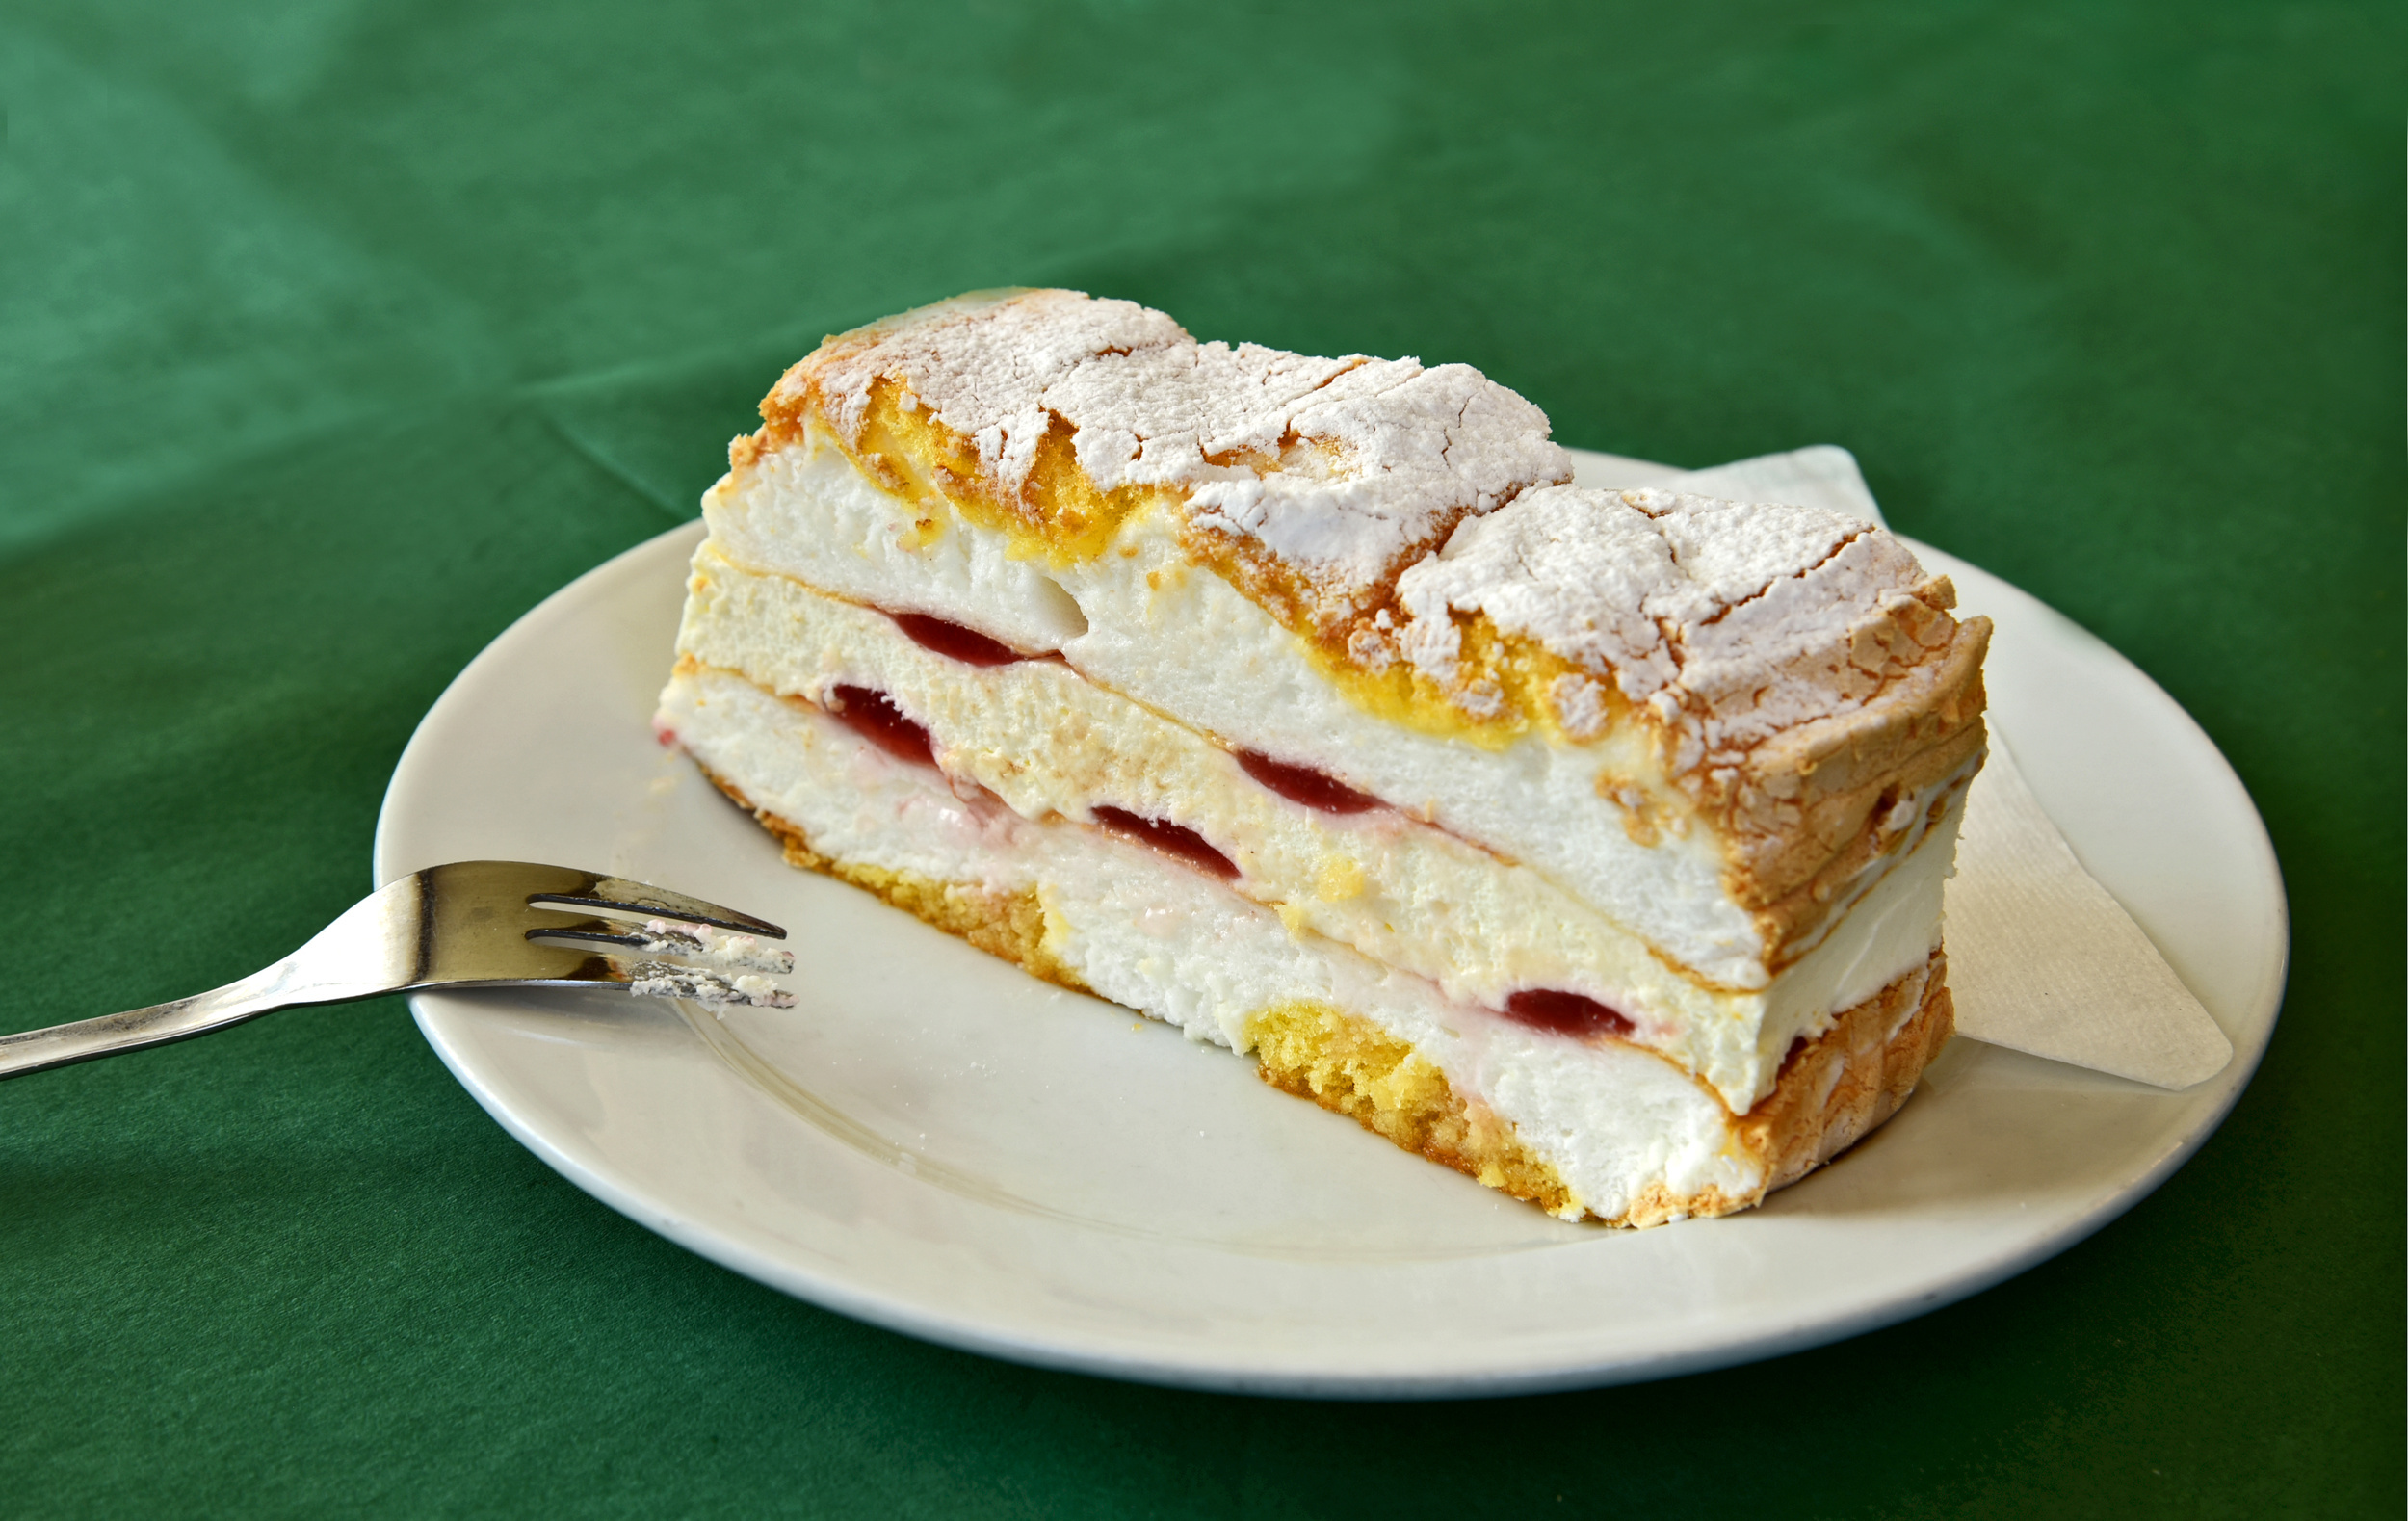 <p><em>Kardinalschnitten</em>, or "cardinal slices," is a traditional Viennese dessert that consists of meringue layered between slices of sponge cake, with yellow and gold colors reminiscent of the Catholic church. Plus, berries provide a pop of red! <a href="https://culinarytalks.com/austrian-cardinal-slice/"><span>Culinary Talks can talk you through the process</span></a>.</p><p>You may also like: <a href='https://www.yardbarker.com/lifestyle/articles/21_food_drink_items_that_have_been_around_for_thousands_of_years/s1__38178665'>21 food & drink items that have been around for thousands of years</a></p>